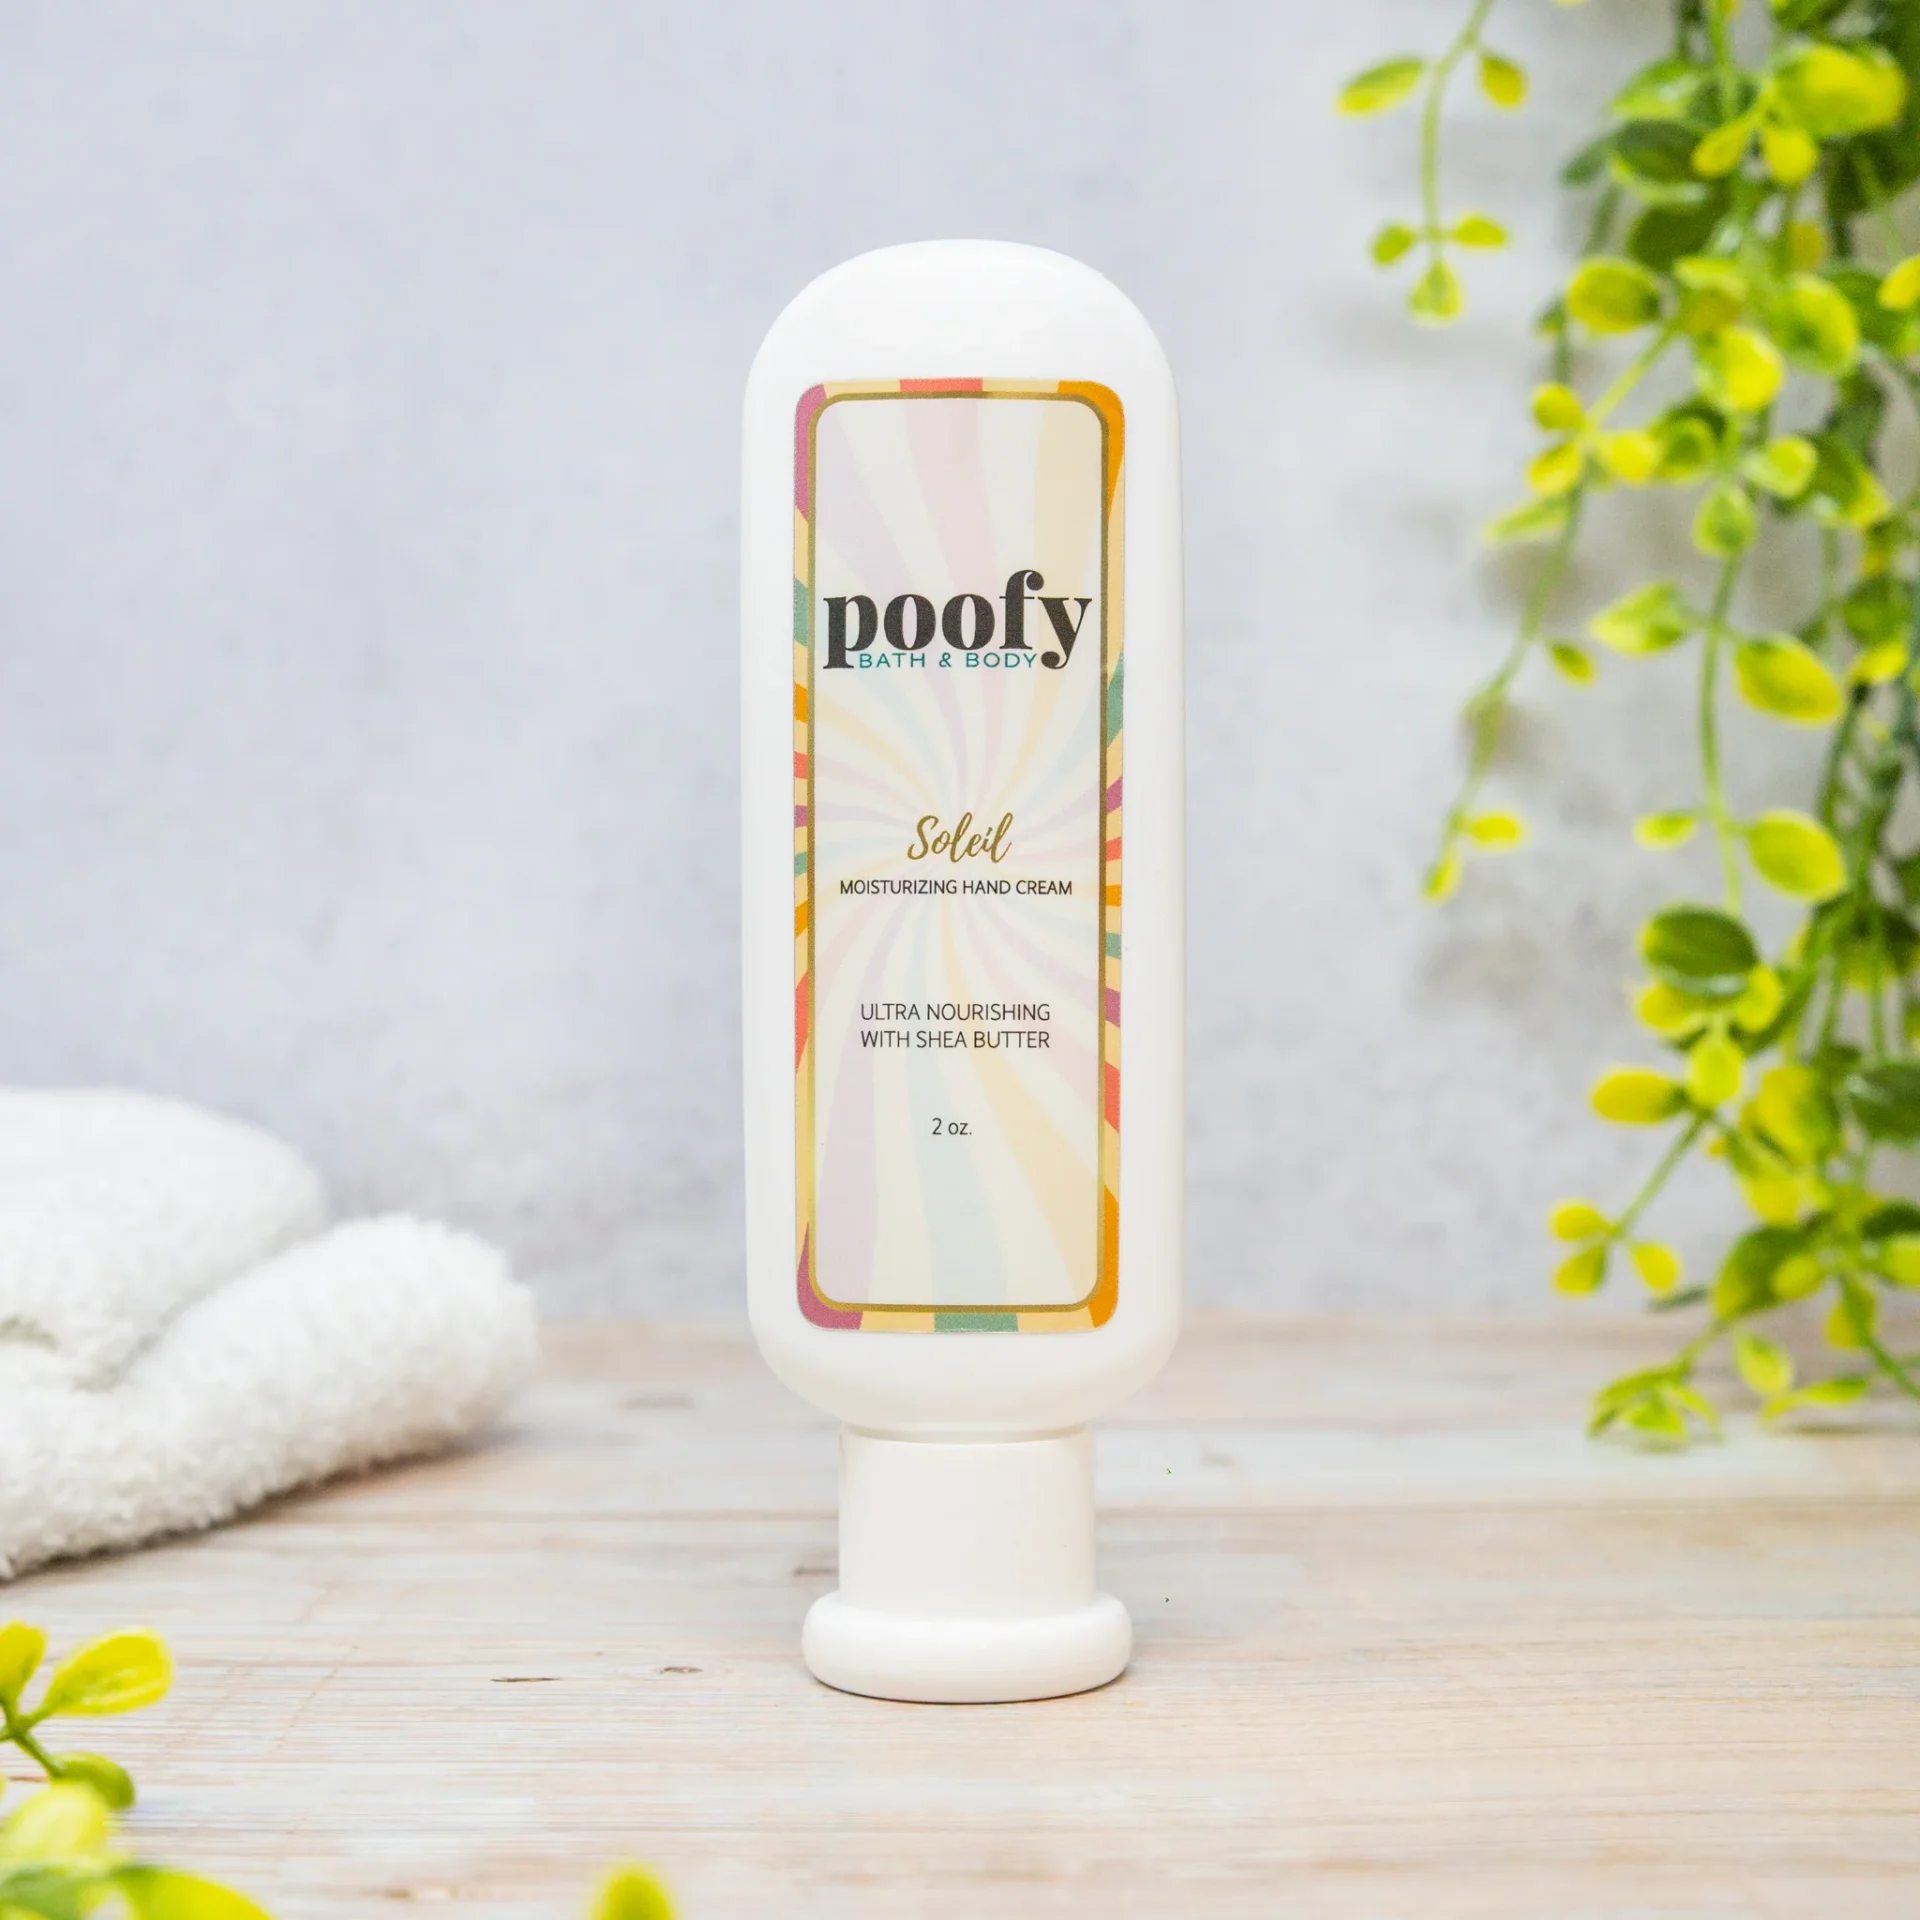 Poofy Organics Hand Cream review and promo code